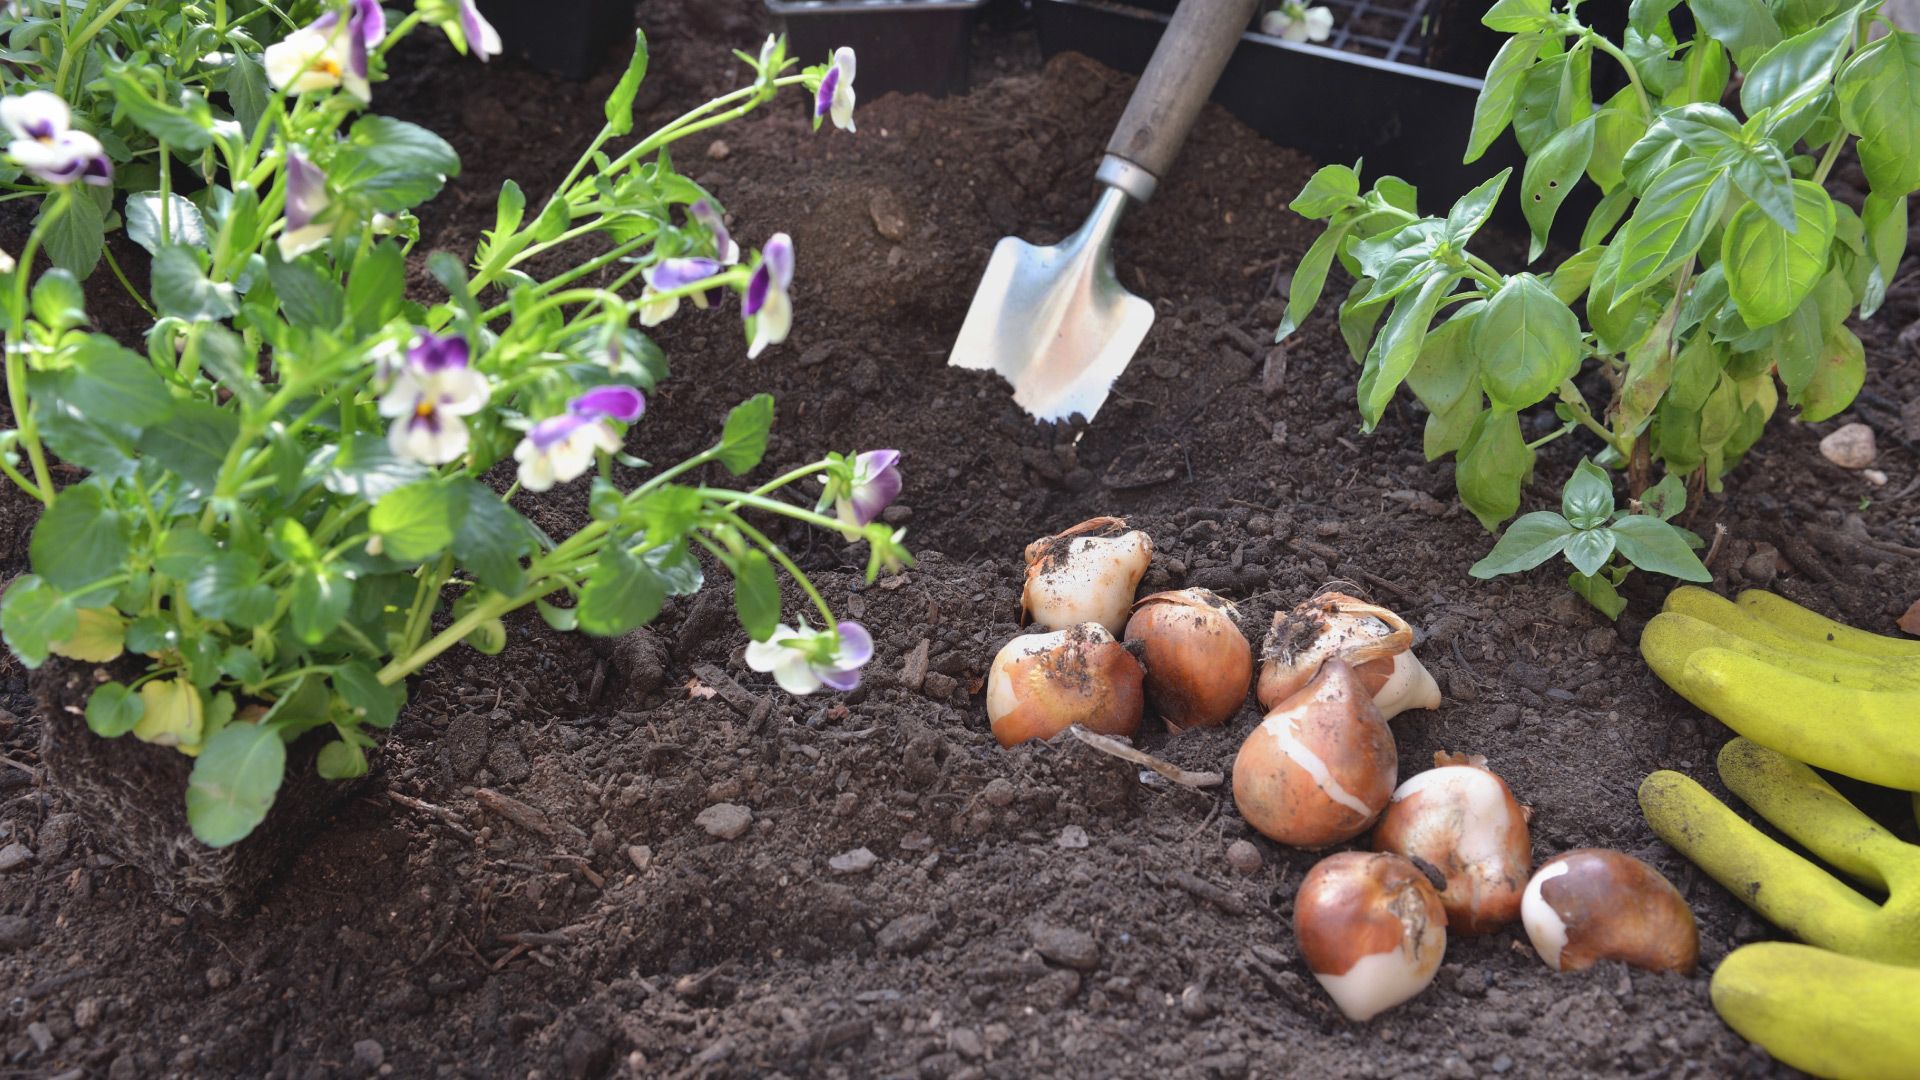 Flower bulbs sit on top of garden soil next to a spade, gardening gloves, and and freshly planted basil and purple flowers.